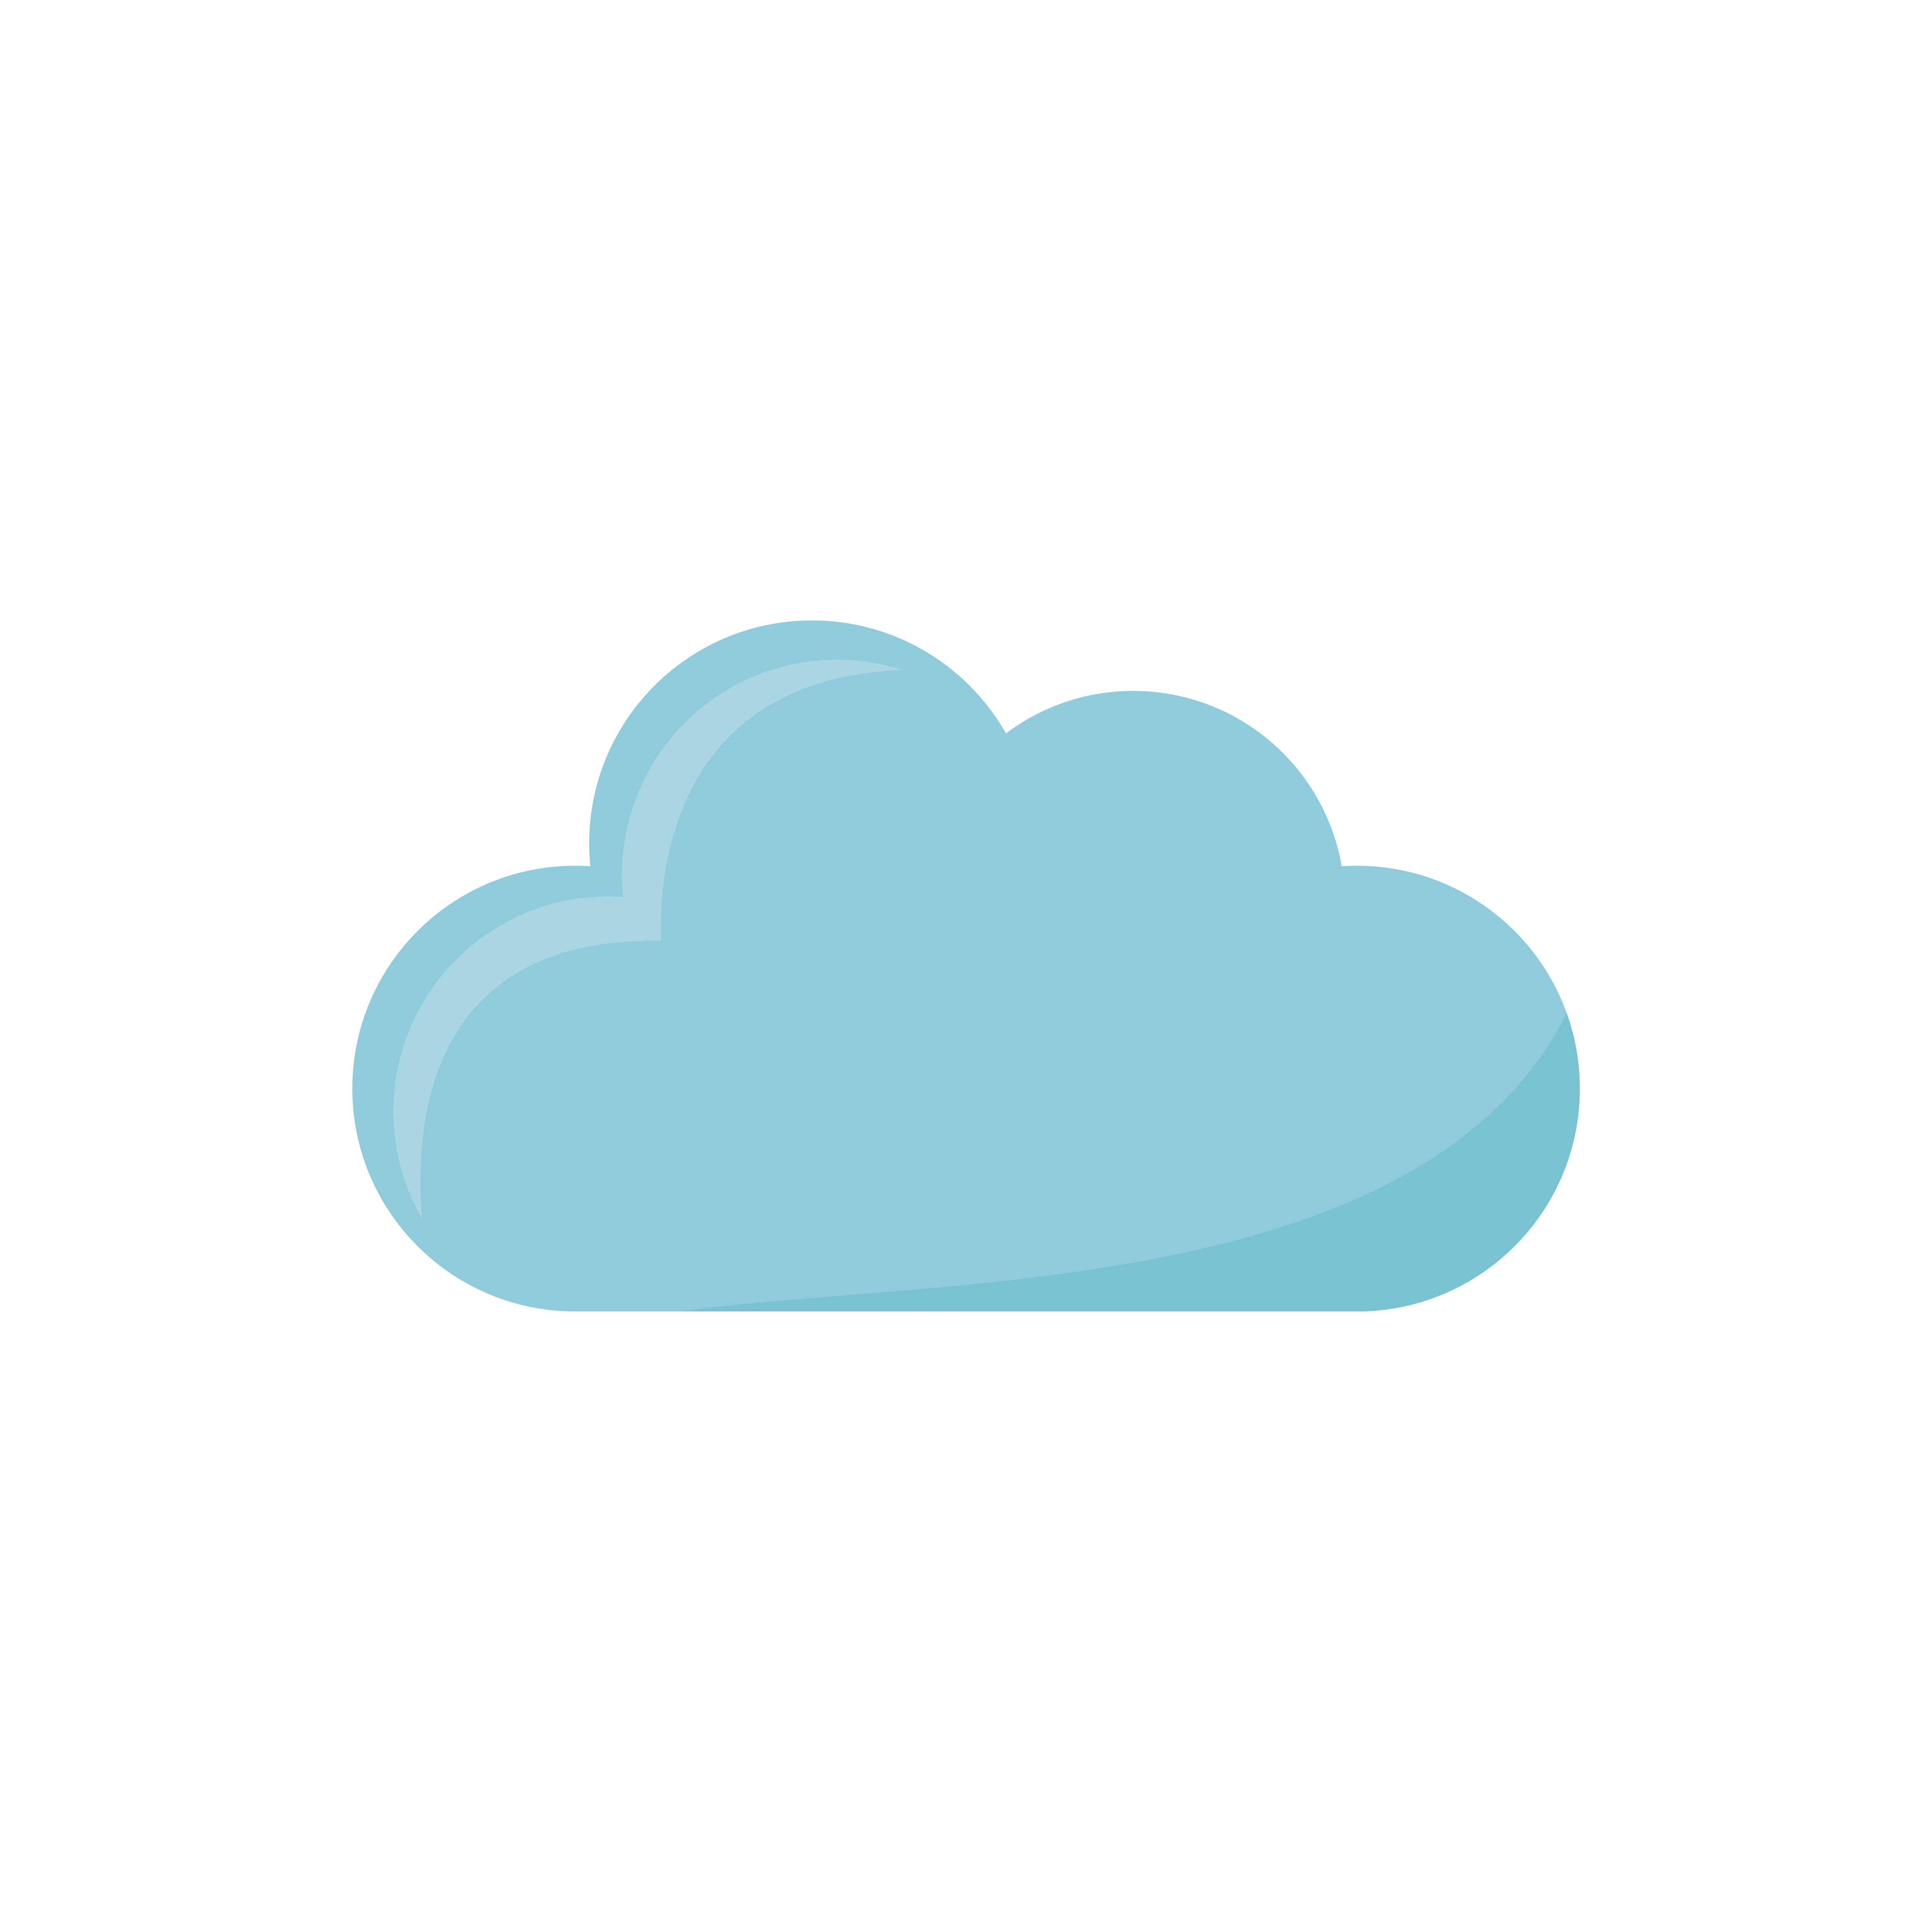 Illustration of cloud icon Download Free Vectors